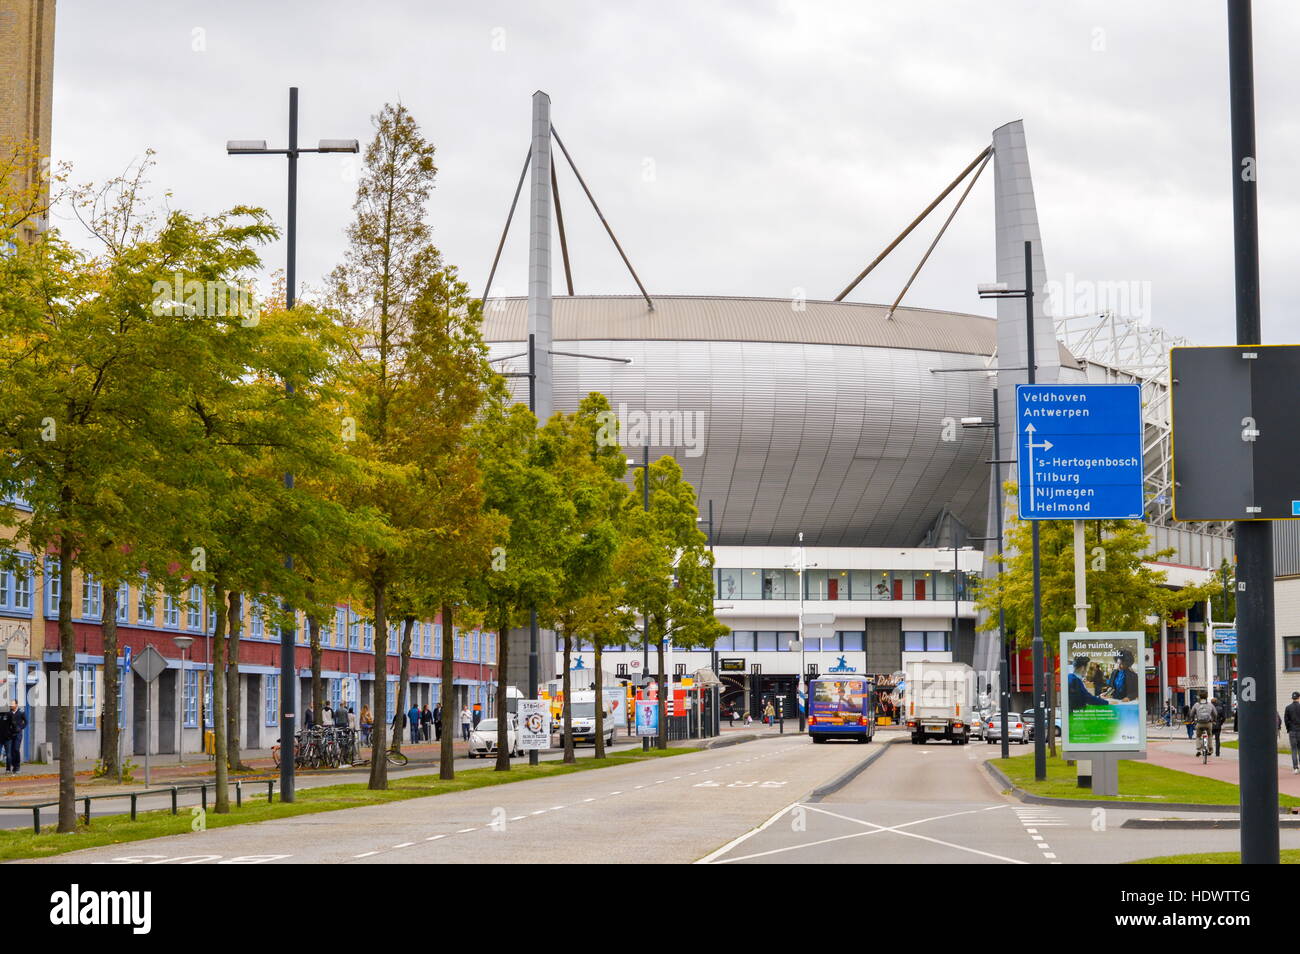 Eindhoven, the Netherlands - 15.09.2015: View at the Philips Stadium, home of the famous soccer team PSV Eindhoven Stock Photo